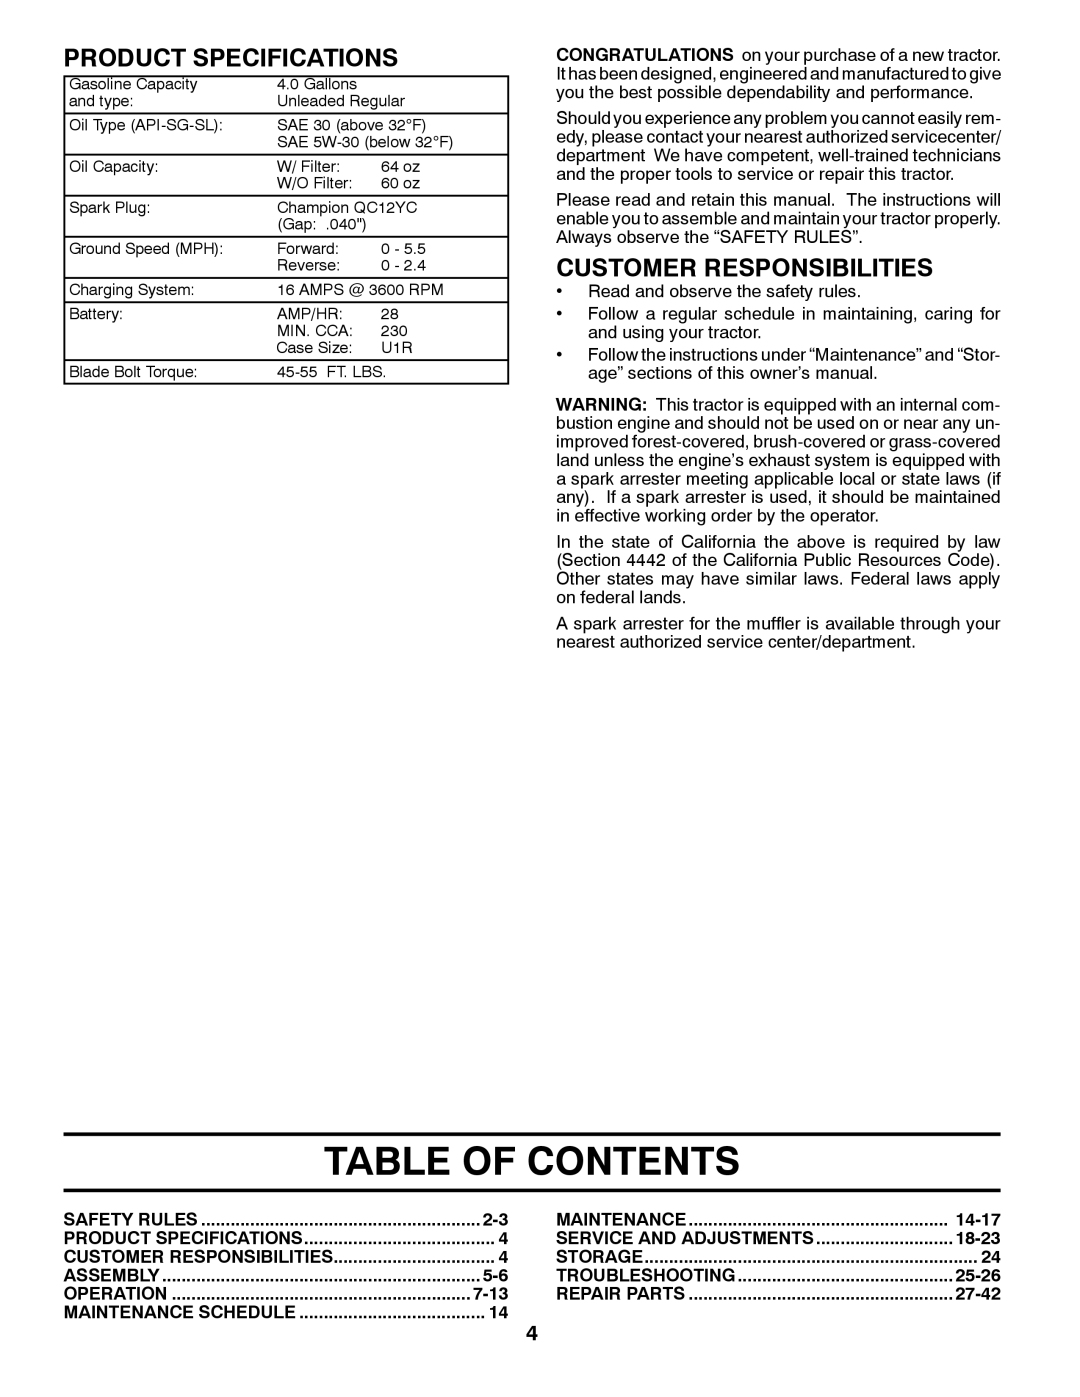 Husqvarna 2146XLS owner manual Table Of Contents, Product Specifications, Customer Responsibilities 